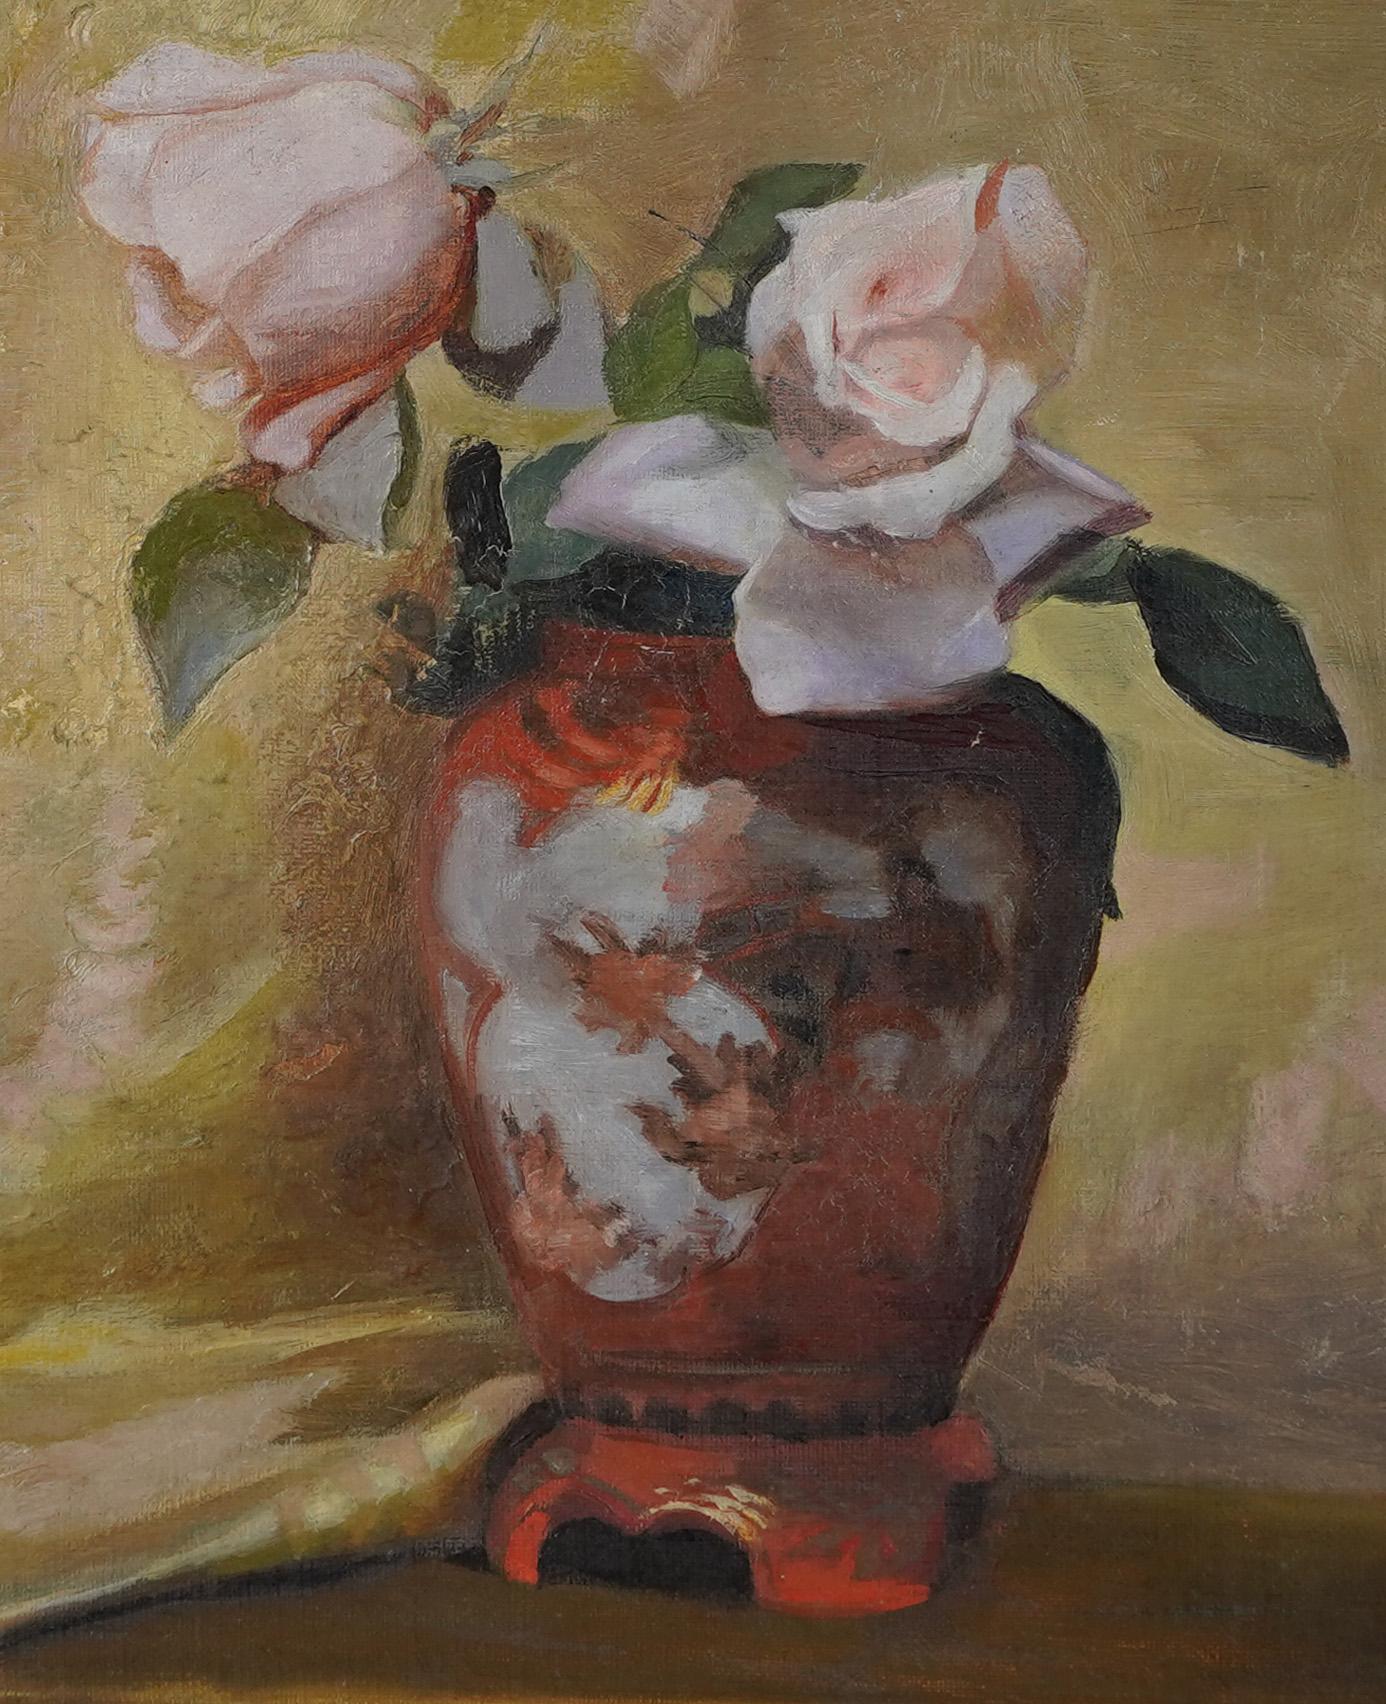 Antique American impressionist rose still life oil painting.  Oil on canvas.  Signed.  Framed.  Image size, 12L x 14H.